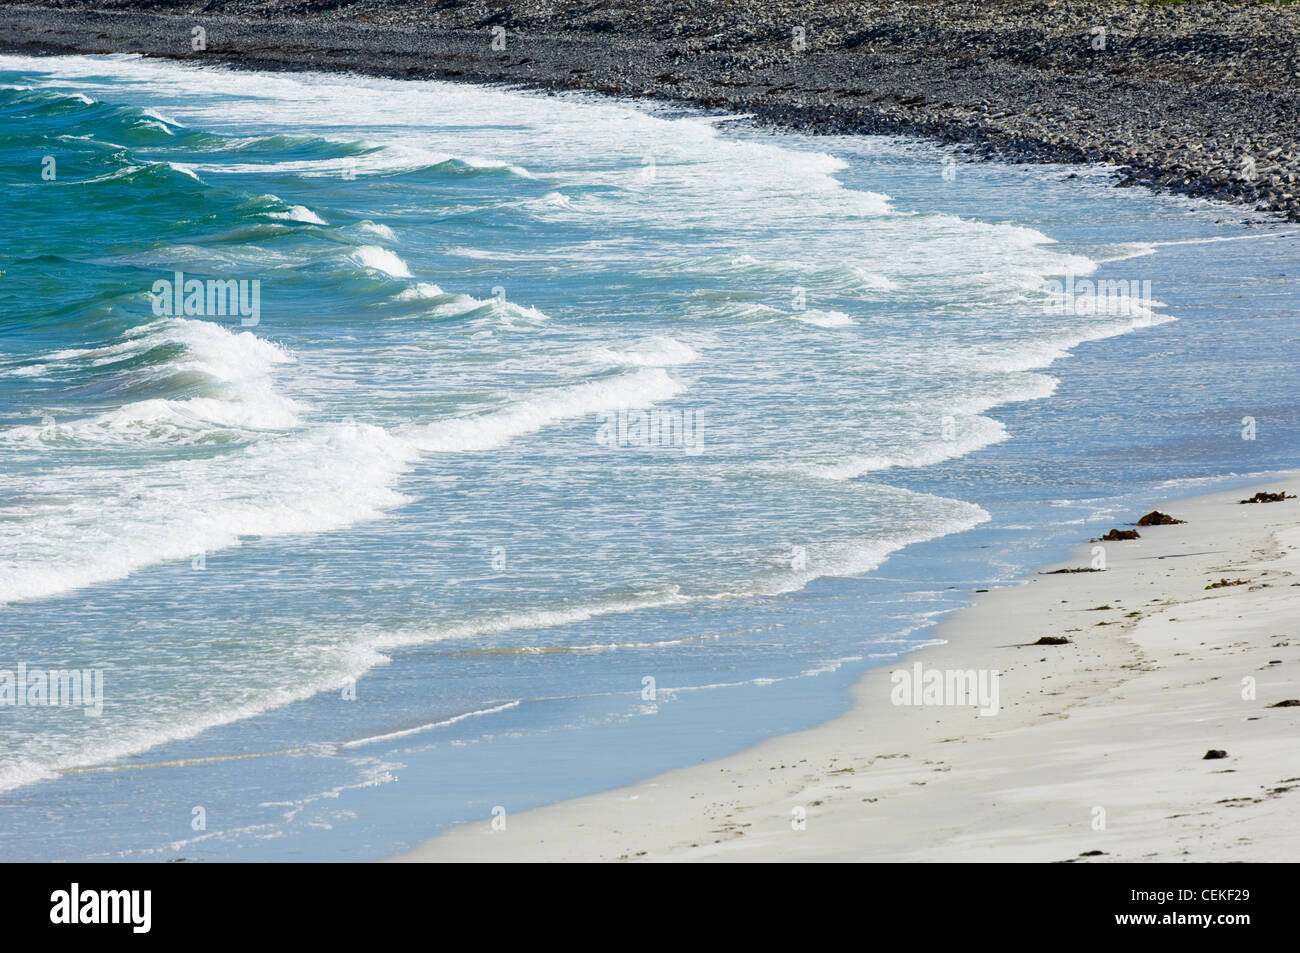 Whitemill Bay on the island of Sanday, Orkney Islands, Scotland. Stock Photo